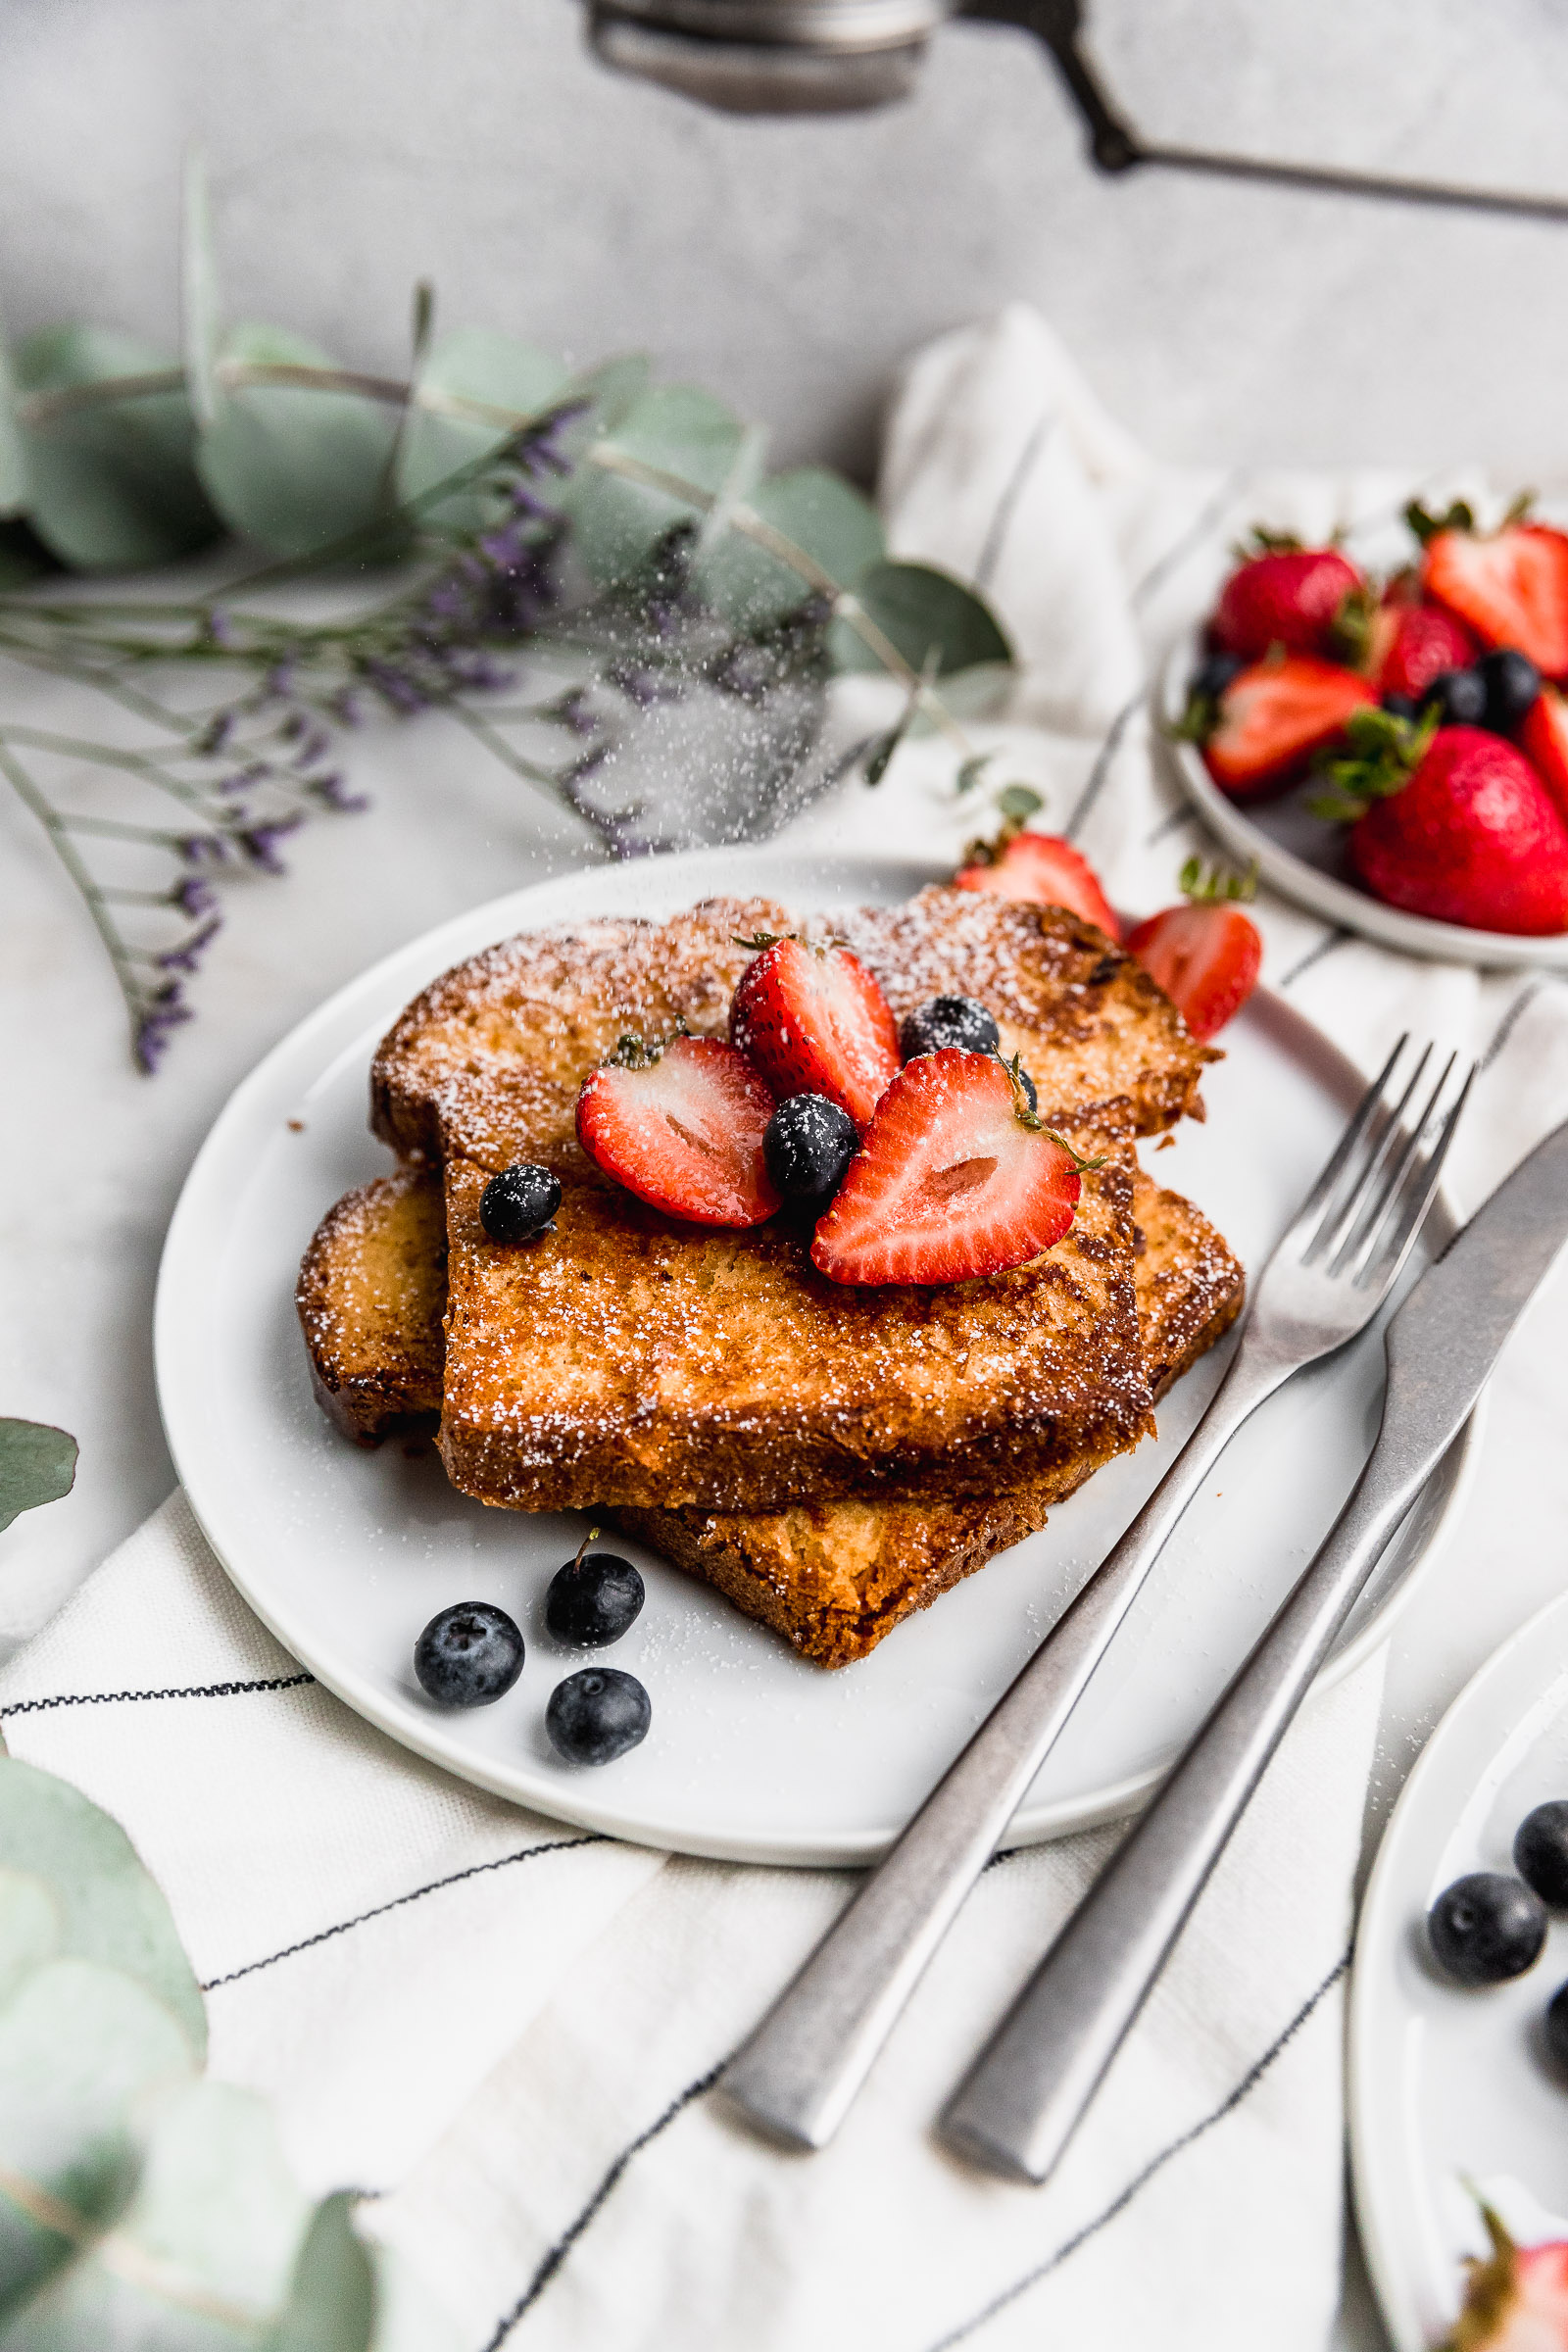 Dusting of icing sugar on brioche french toast with berries